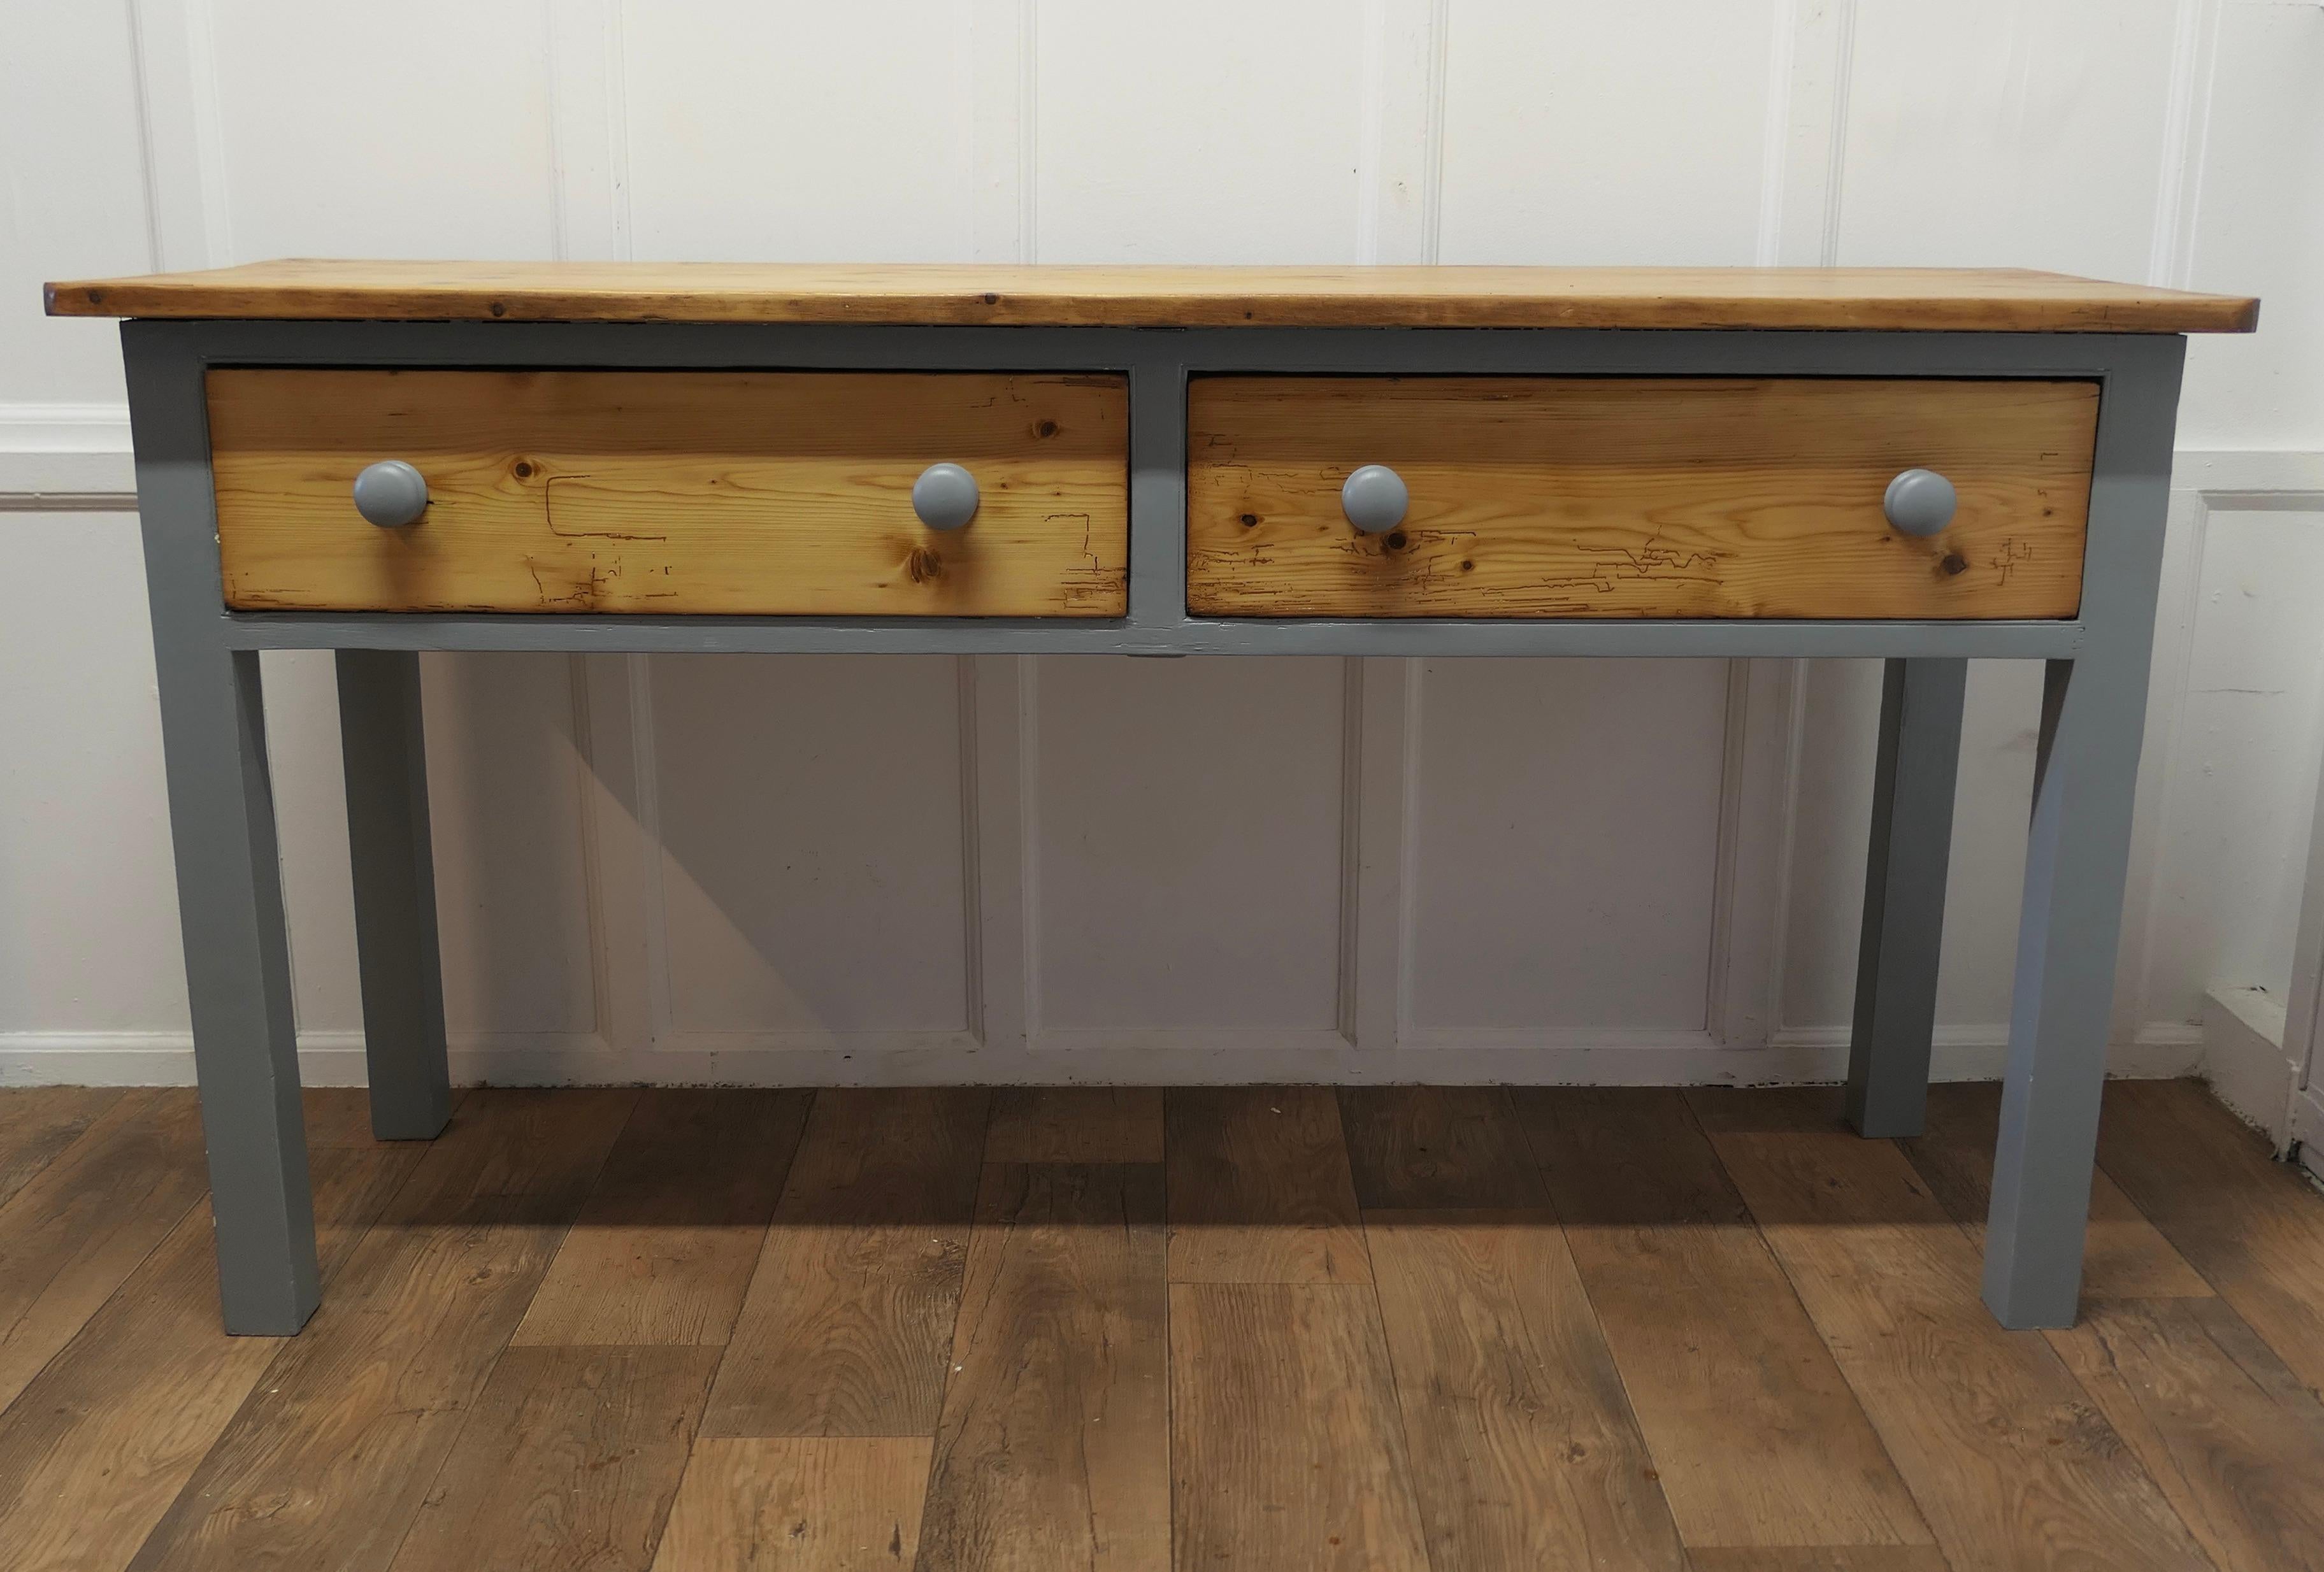 A Victorian Pine Kitchen Dresser 

The dresser base has a thick solid pine top, it stands on square legs and there are two deep heavy pine drawers with turned knobs
The dresser has been fully restored and given a bright new look by having the legs